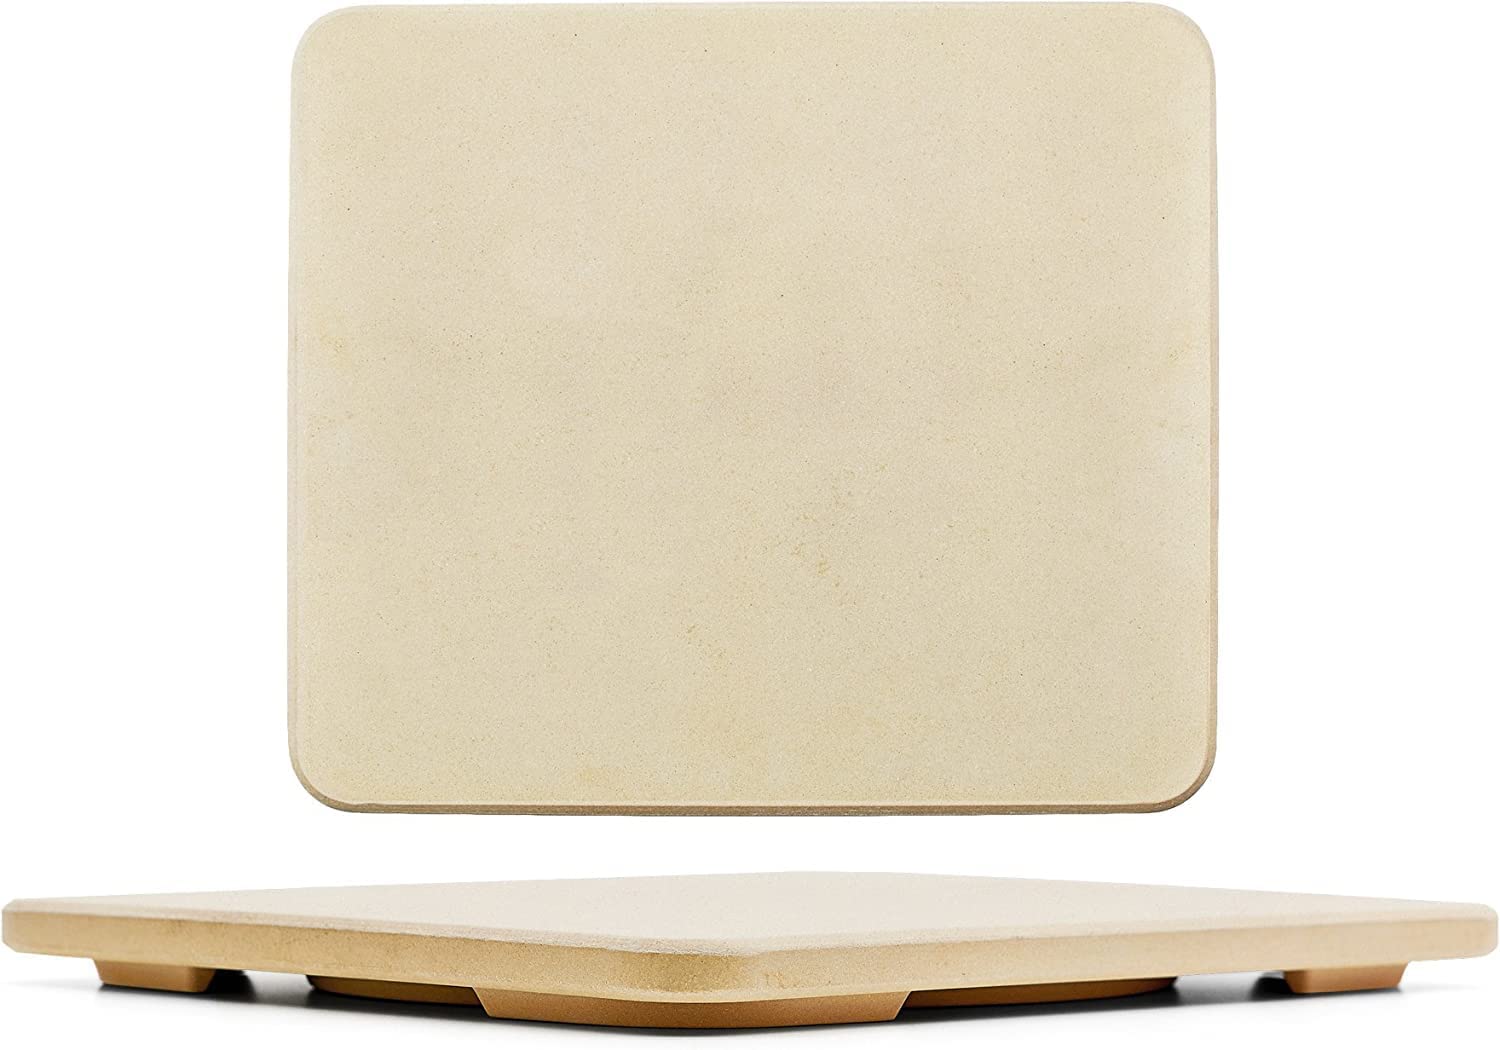 Pizza Stone - Baking Stone. SOLIDO Rectangular 14"x16" - Perfect for Oven, BBQ and Grill